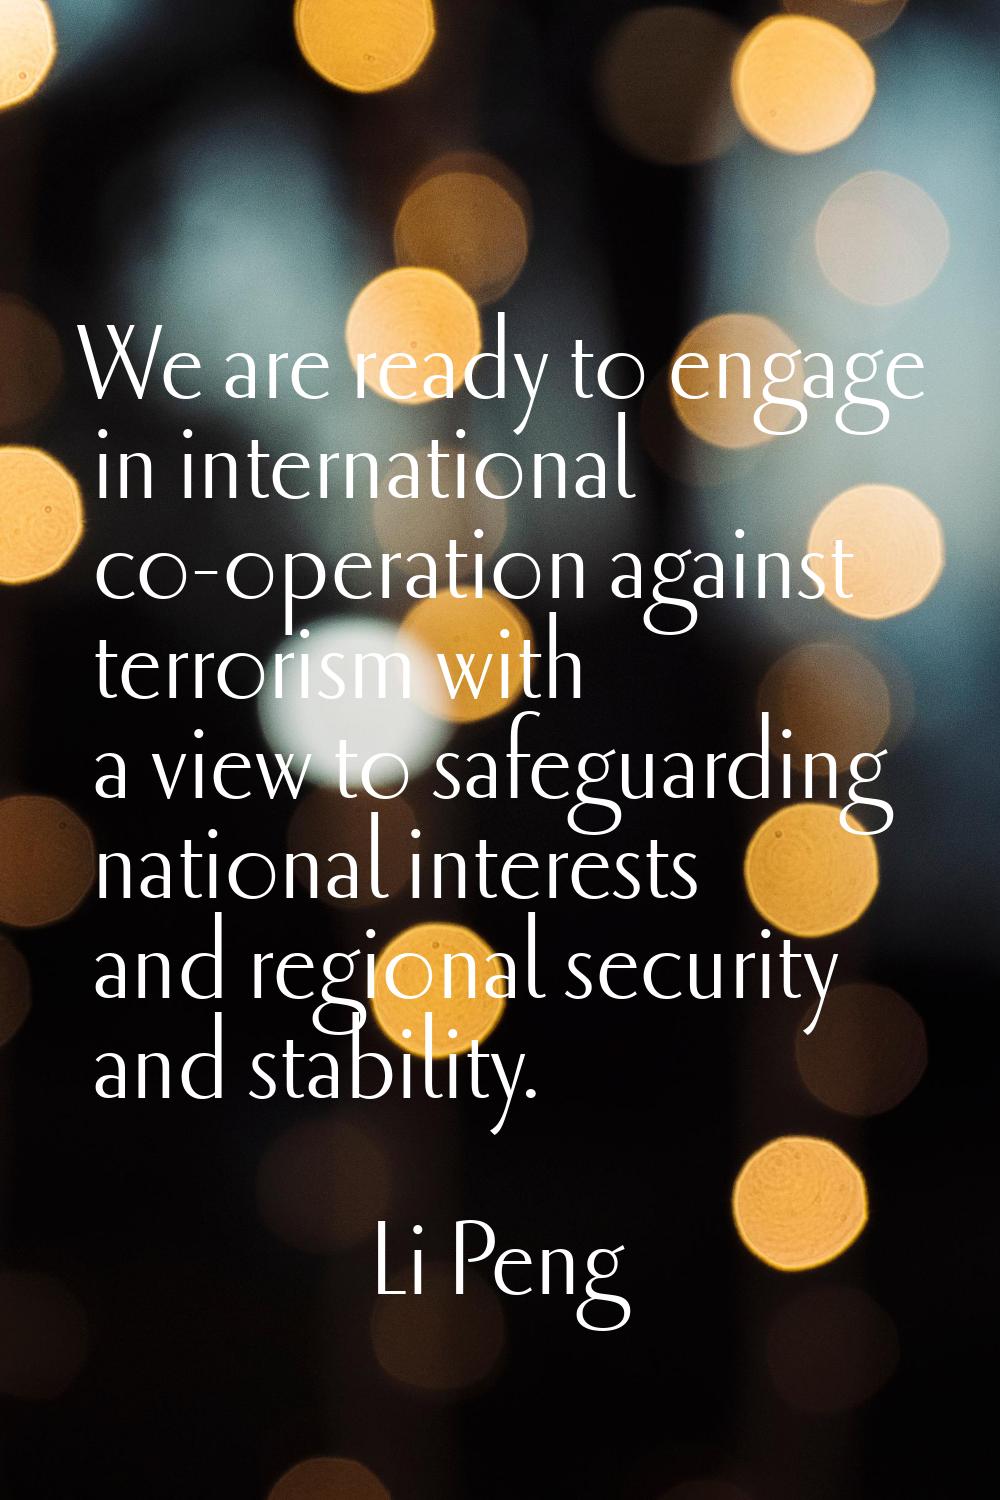 We are ready to engage in international co-operation against terrorism with a view to safeguarding 